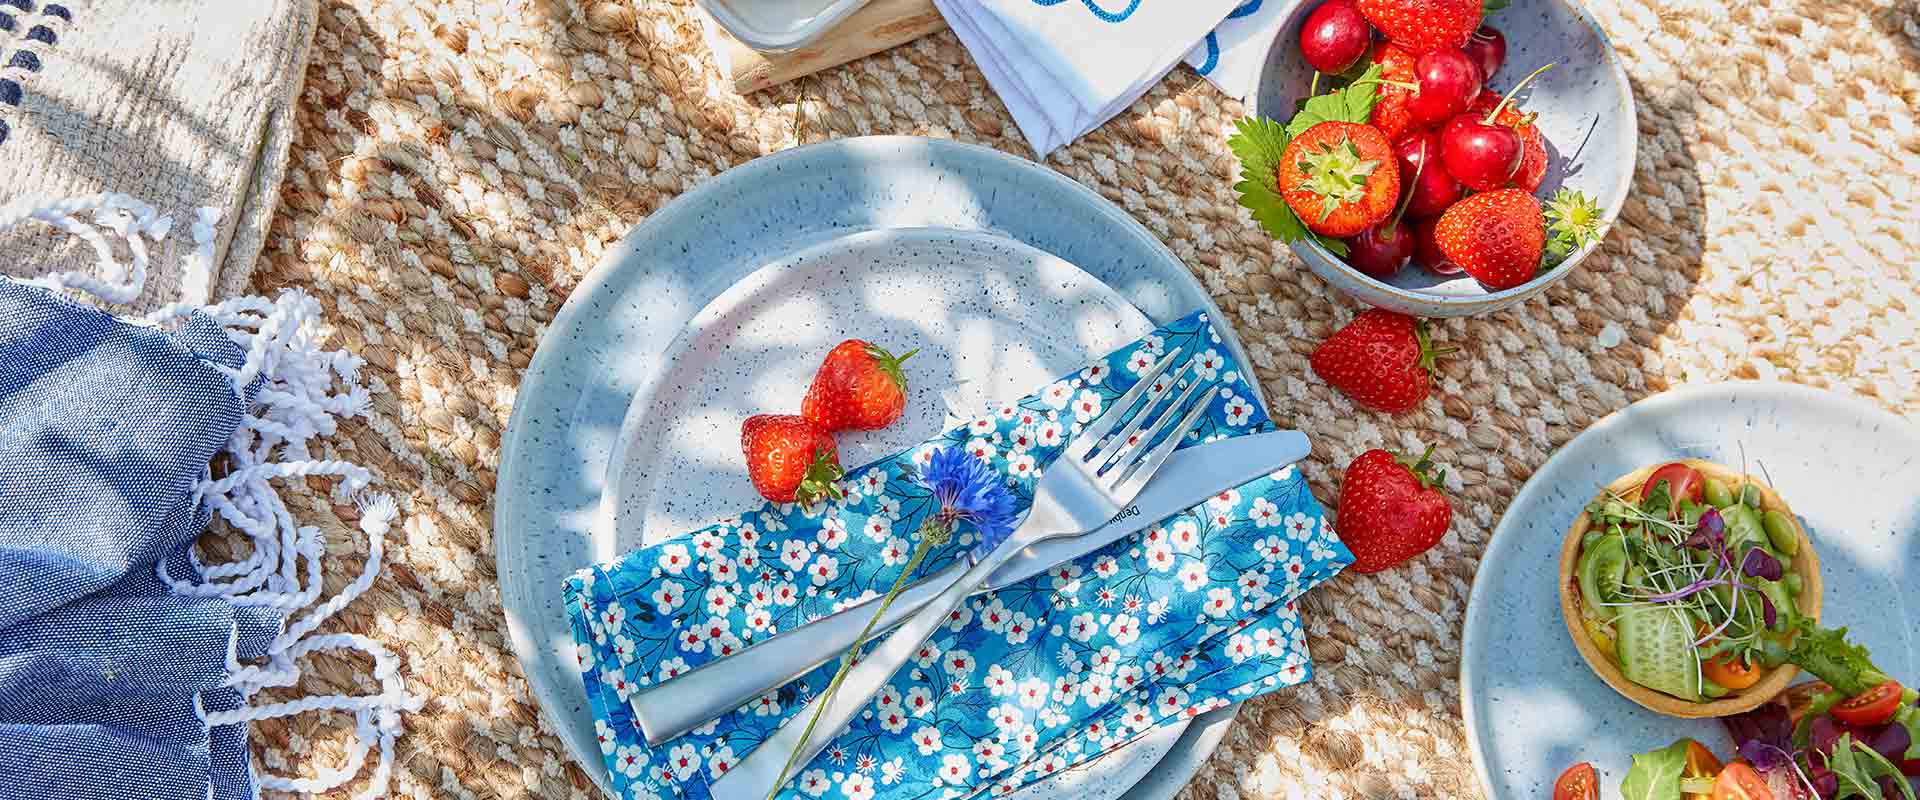 9 Romantic Picnic Essentials For A Date You Won’t Forget | Minimax